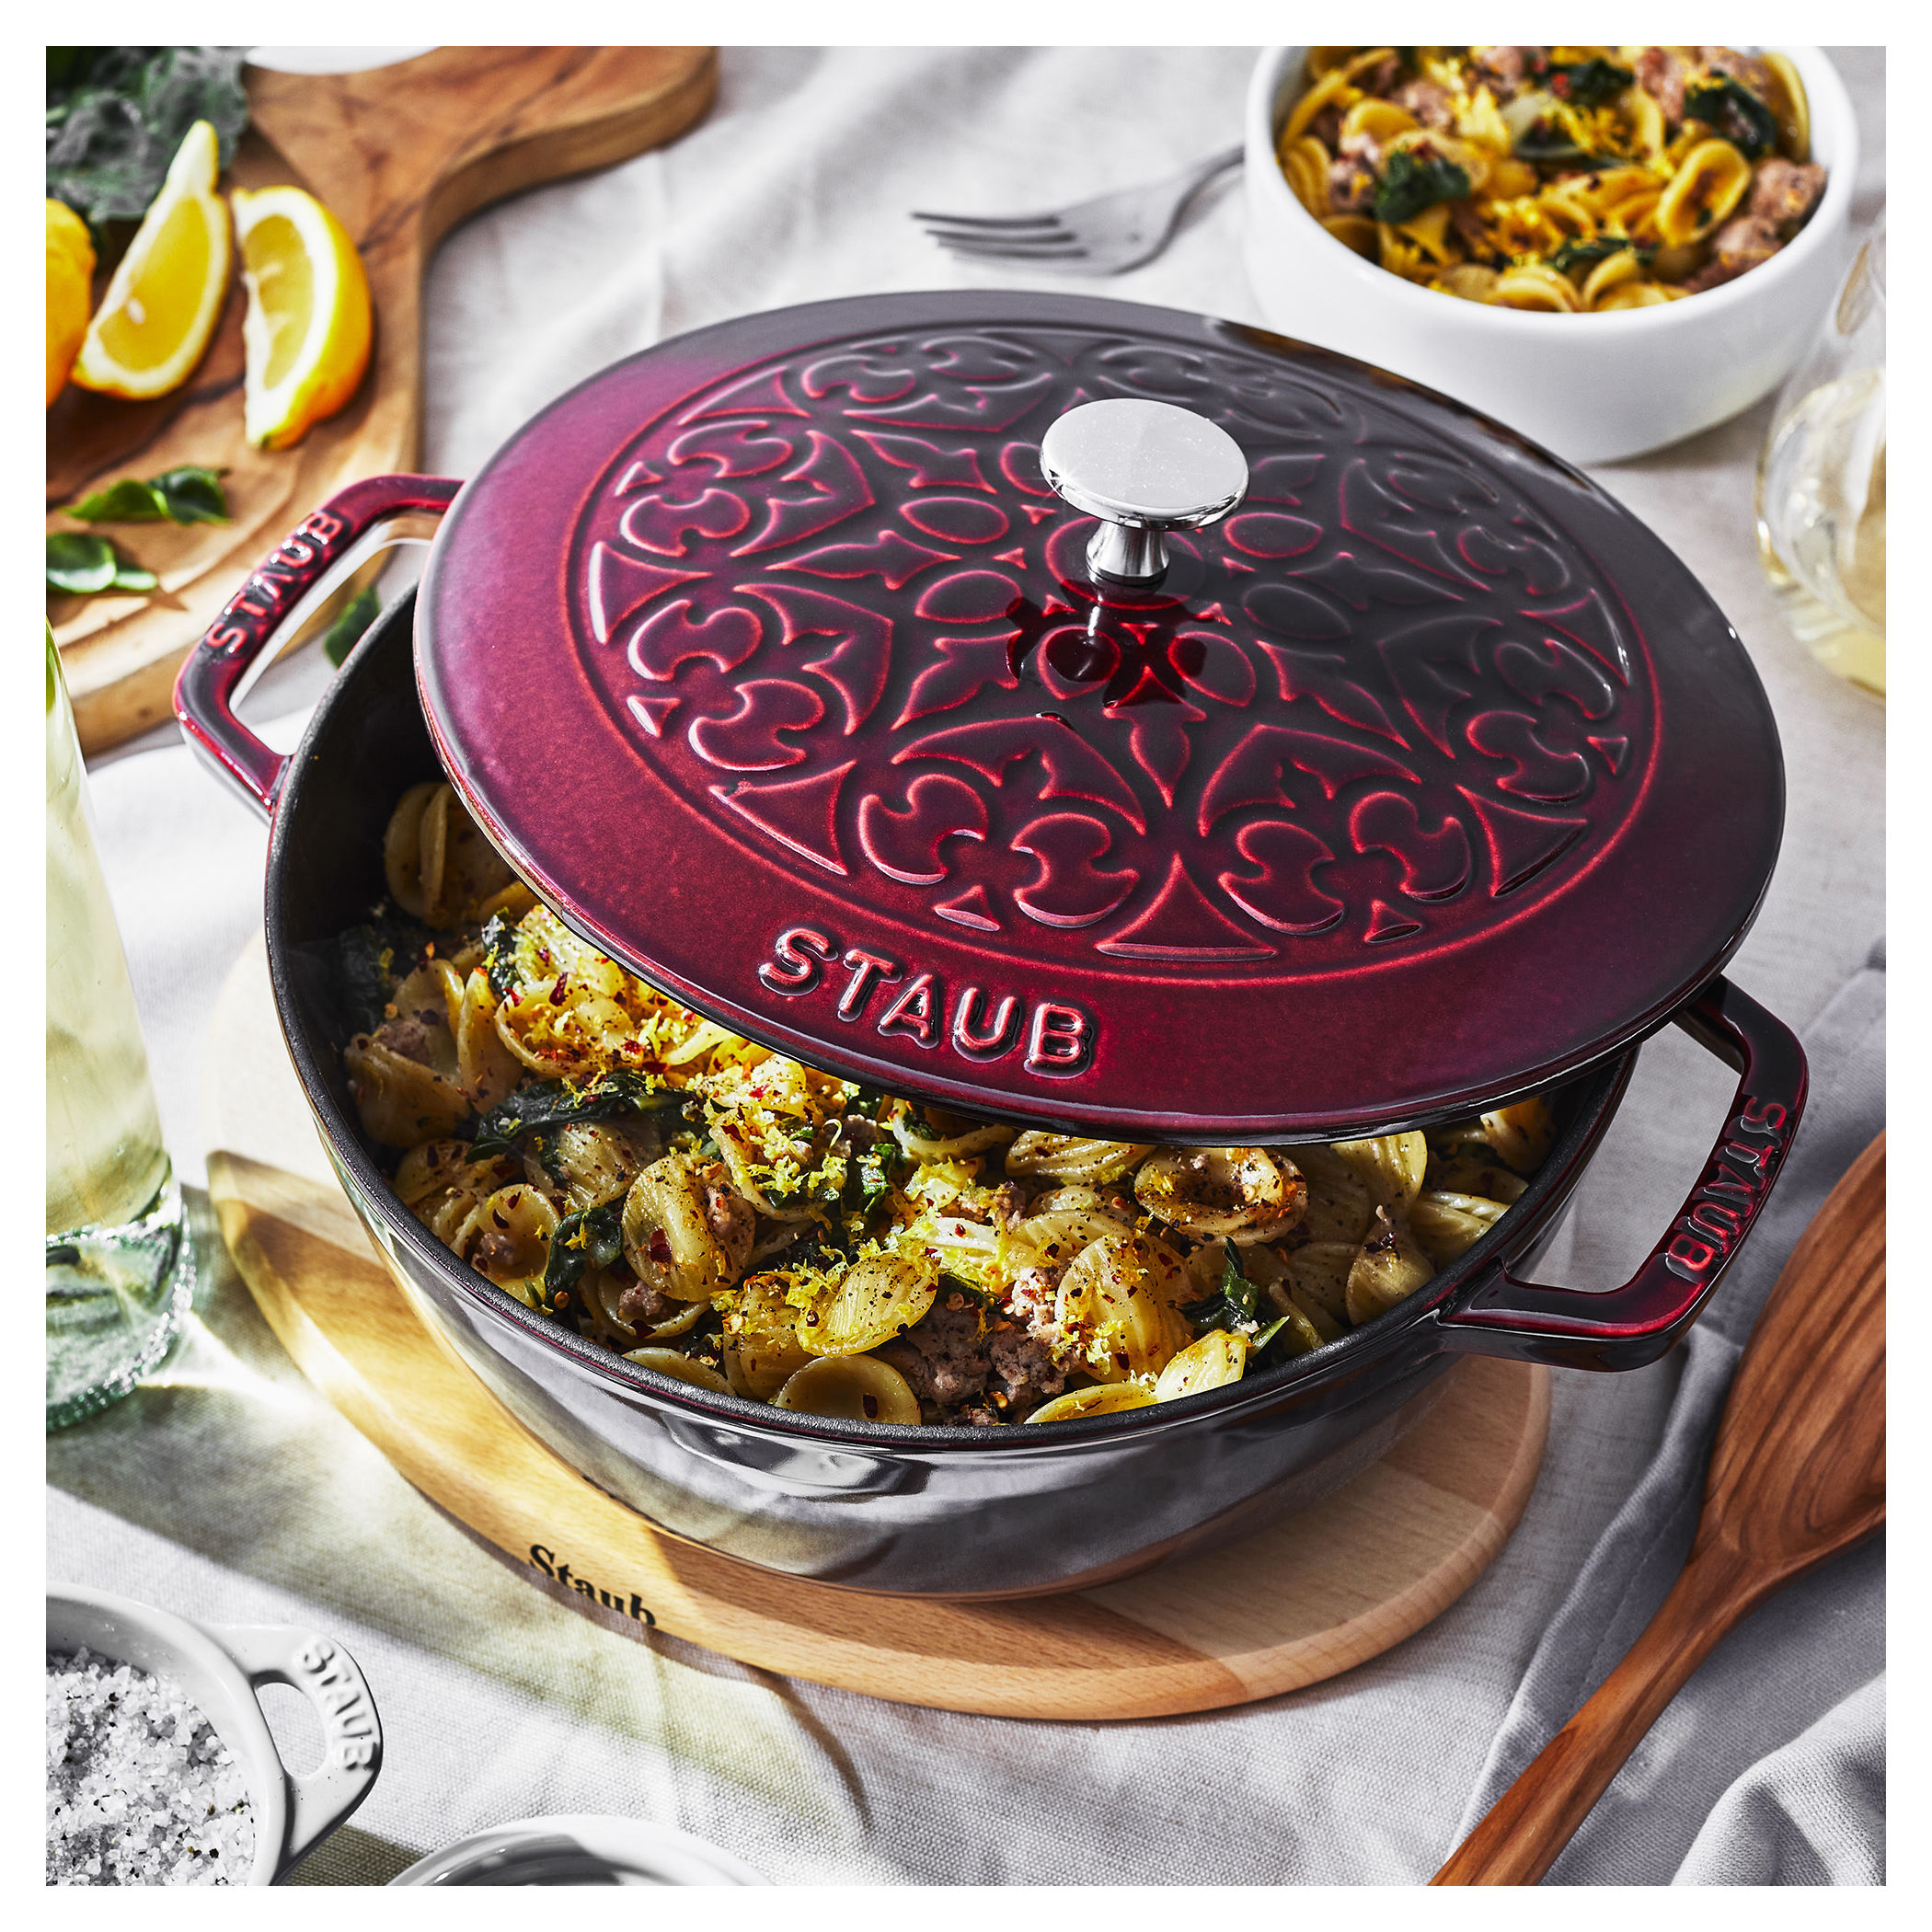 Staub Cast Iron Dutch Oven, 3.75Qt, serves 3-4, Made in France